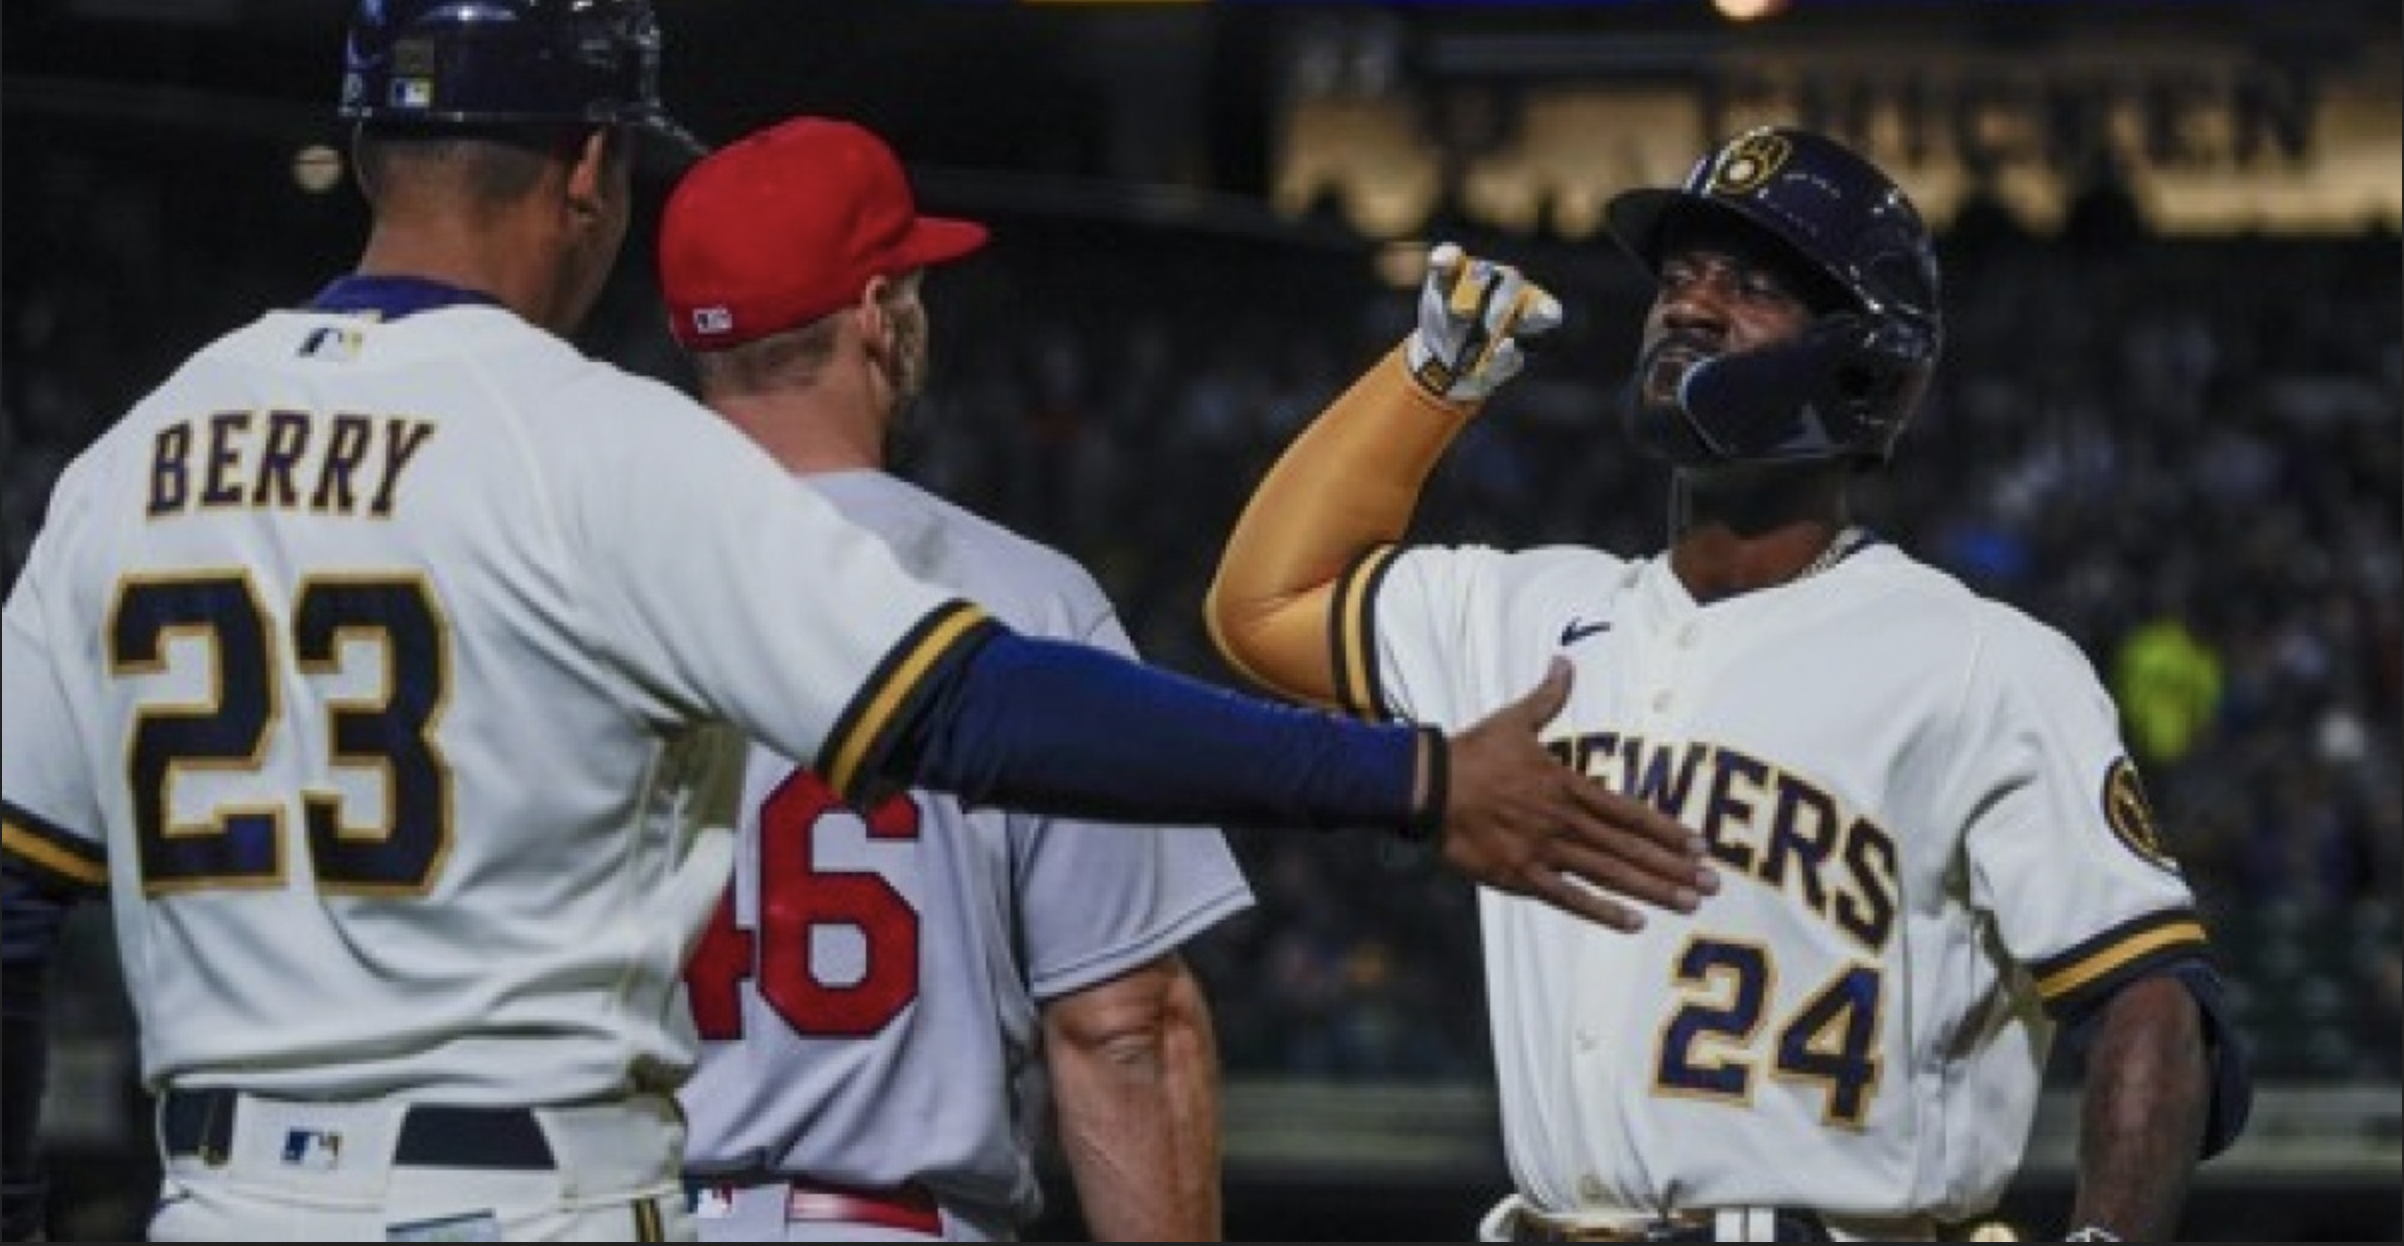 Woodruff returns to form as Brewers defeat Cardinals 5-1